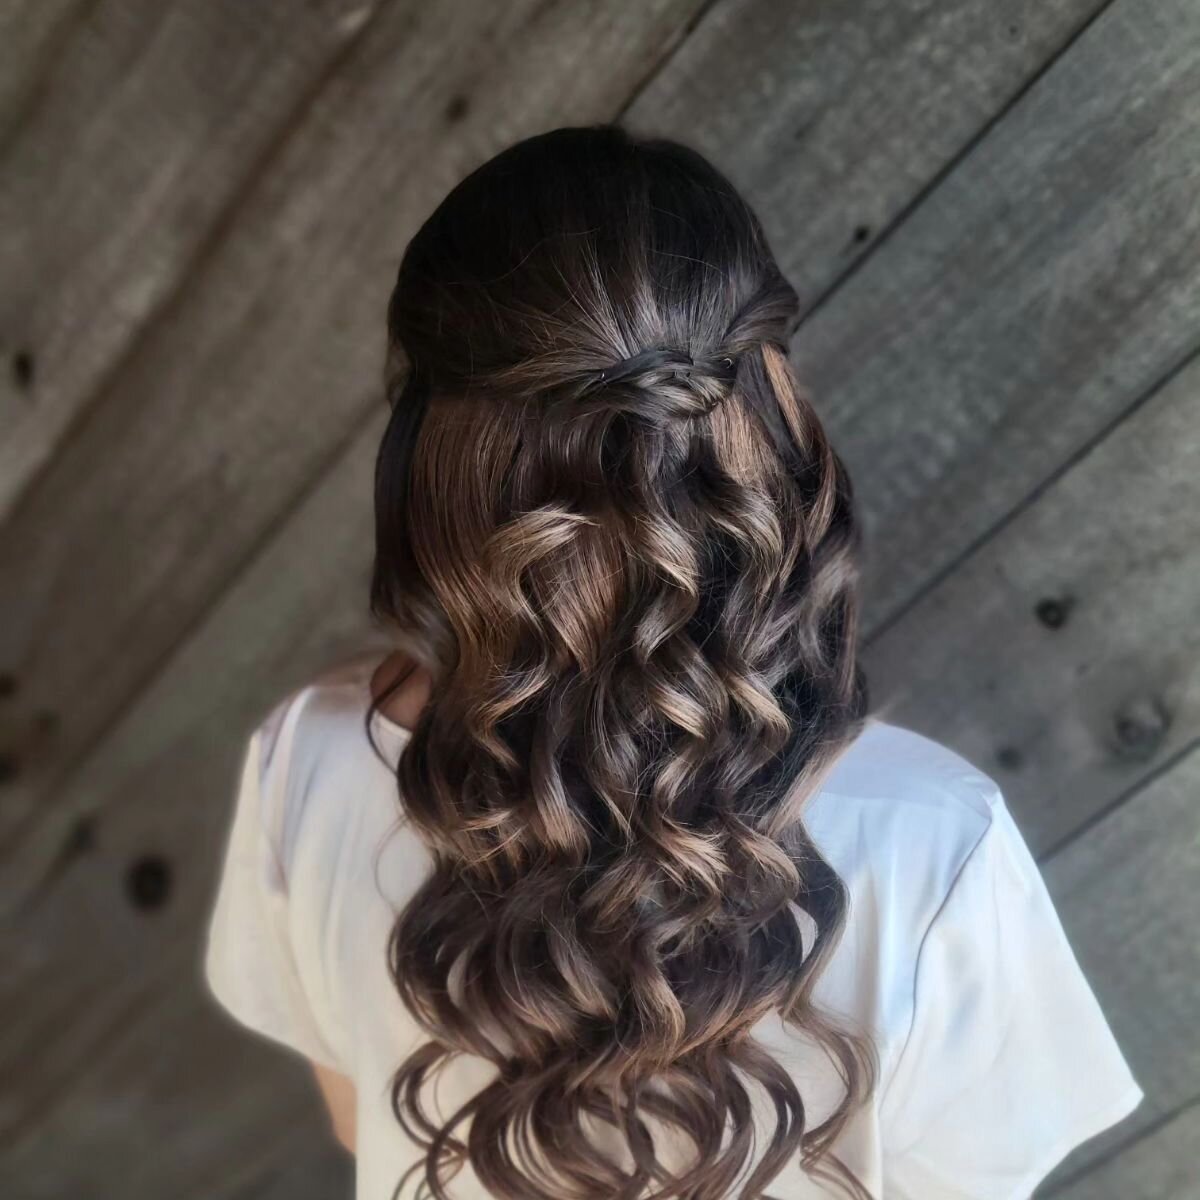 Brides love to add volume &amp; length with clip-in extensions. 
Hair: Amanda 
Extensions: @remedyhairextensions using color Chai Latte